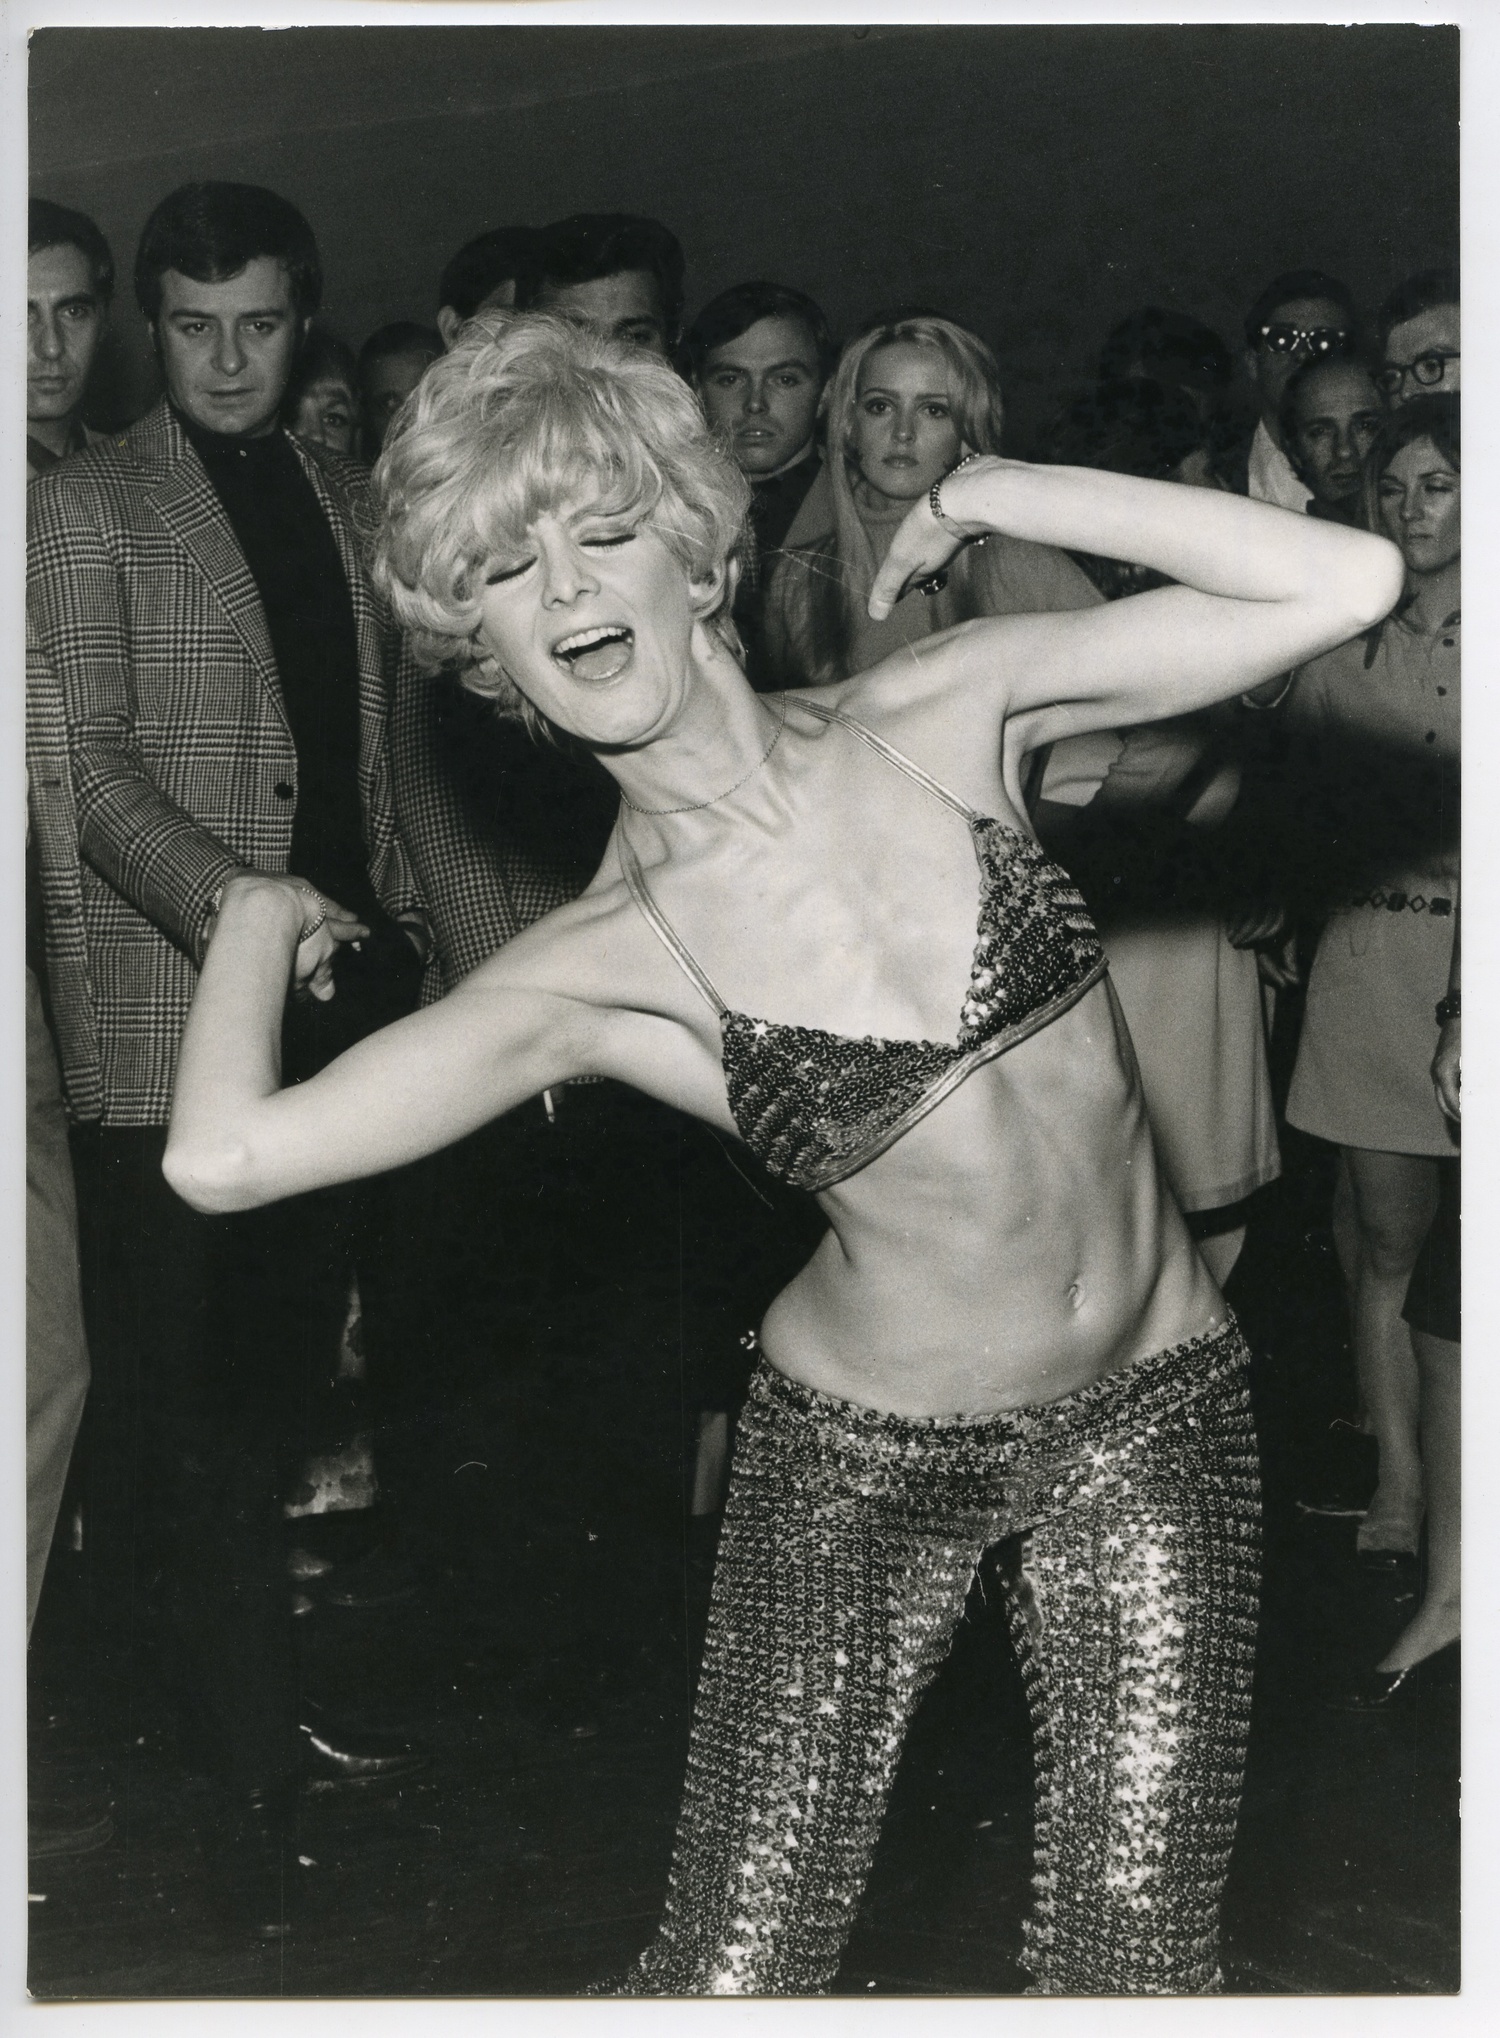 A sequined-clad dancer at the Electric Circus in the East Village. COURTESY LARRY CONFINO